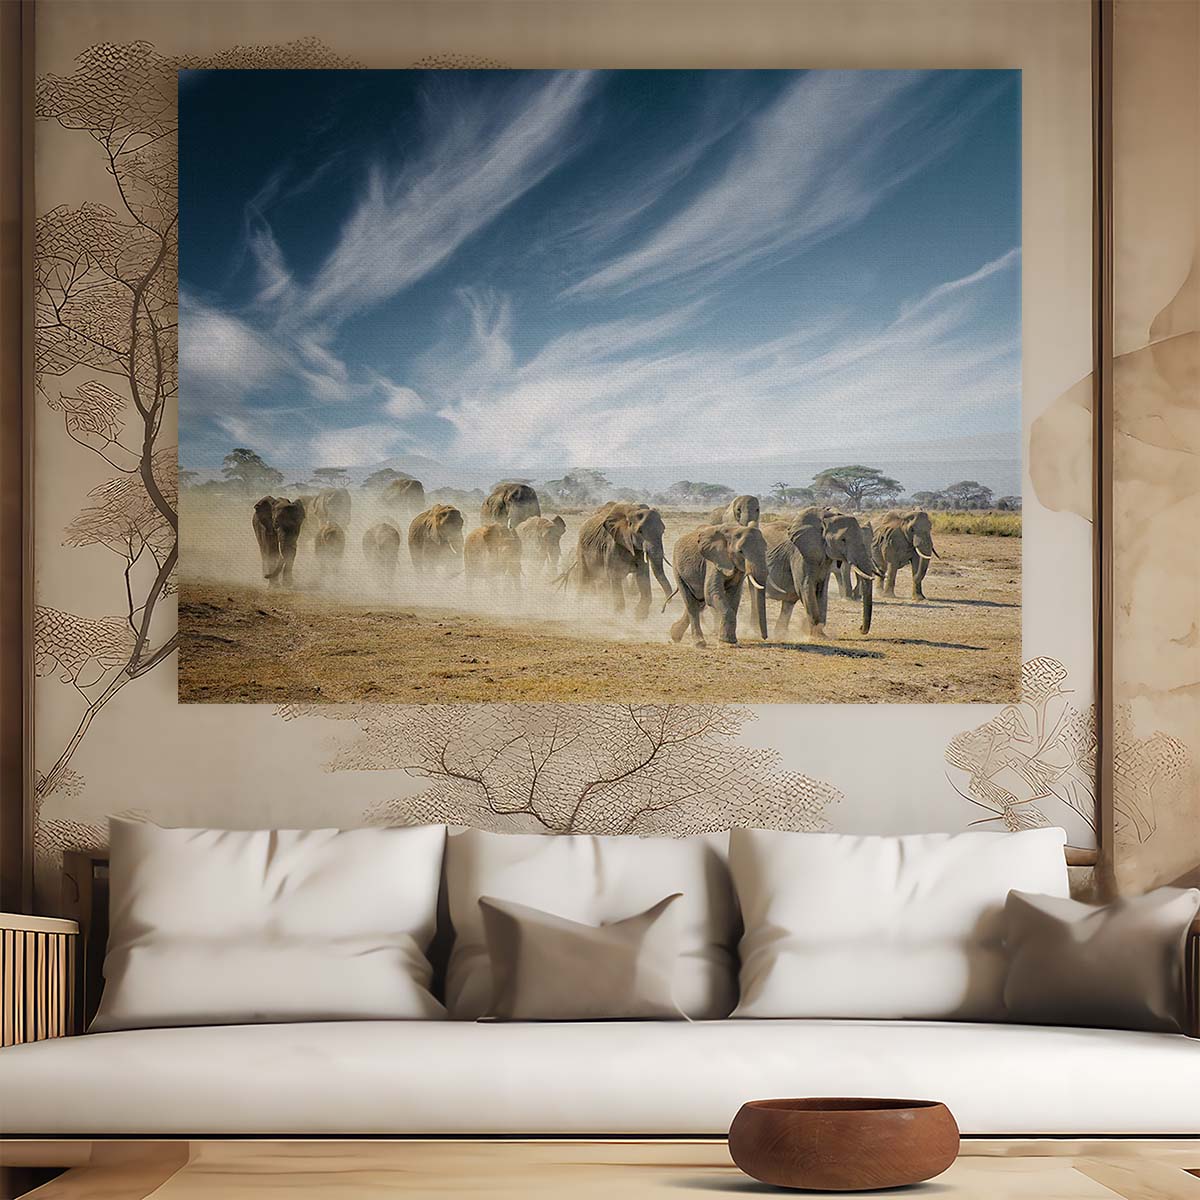 African Elephant Herd in Amboseli Park Wall Art by Luxuriance Designs. Made in USA.